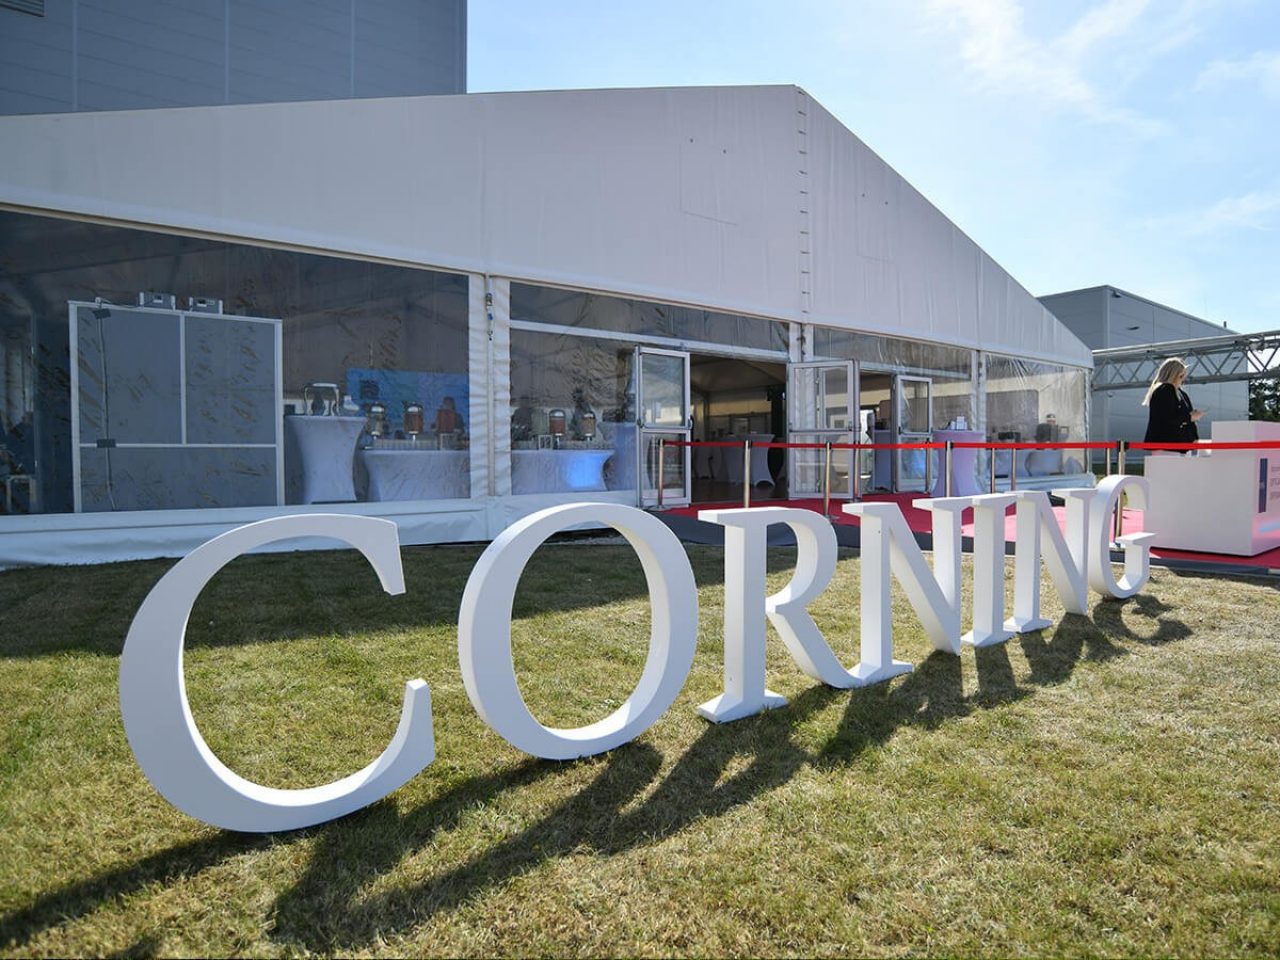 The Corning logo cut out in white foam stands on lawn in front of an events marquee on a bright sunny day. A red carpet is laid out at the entrance.